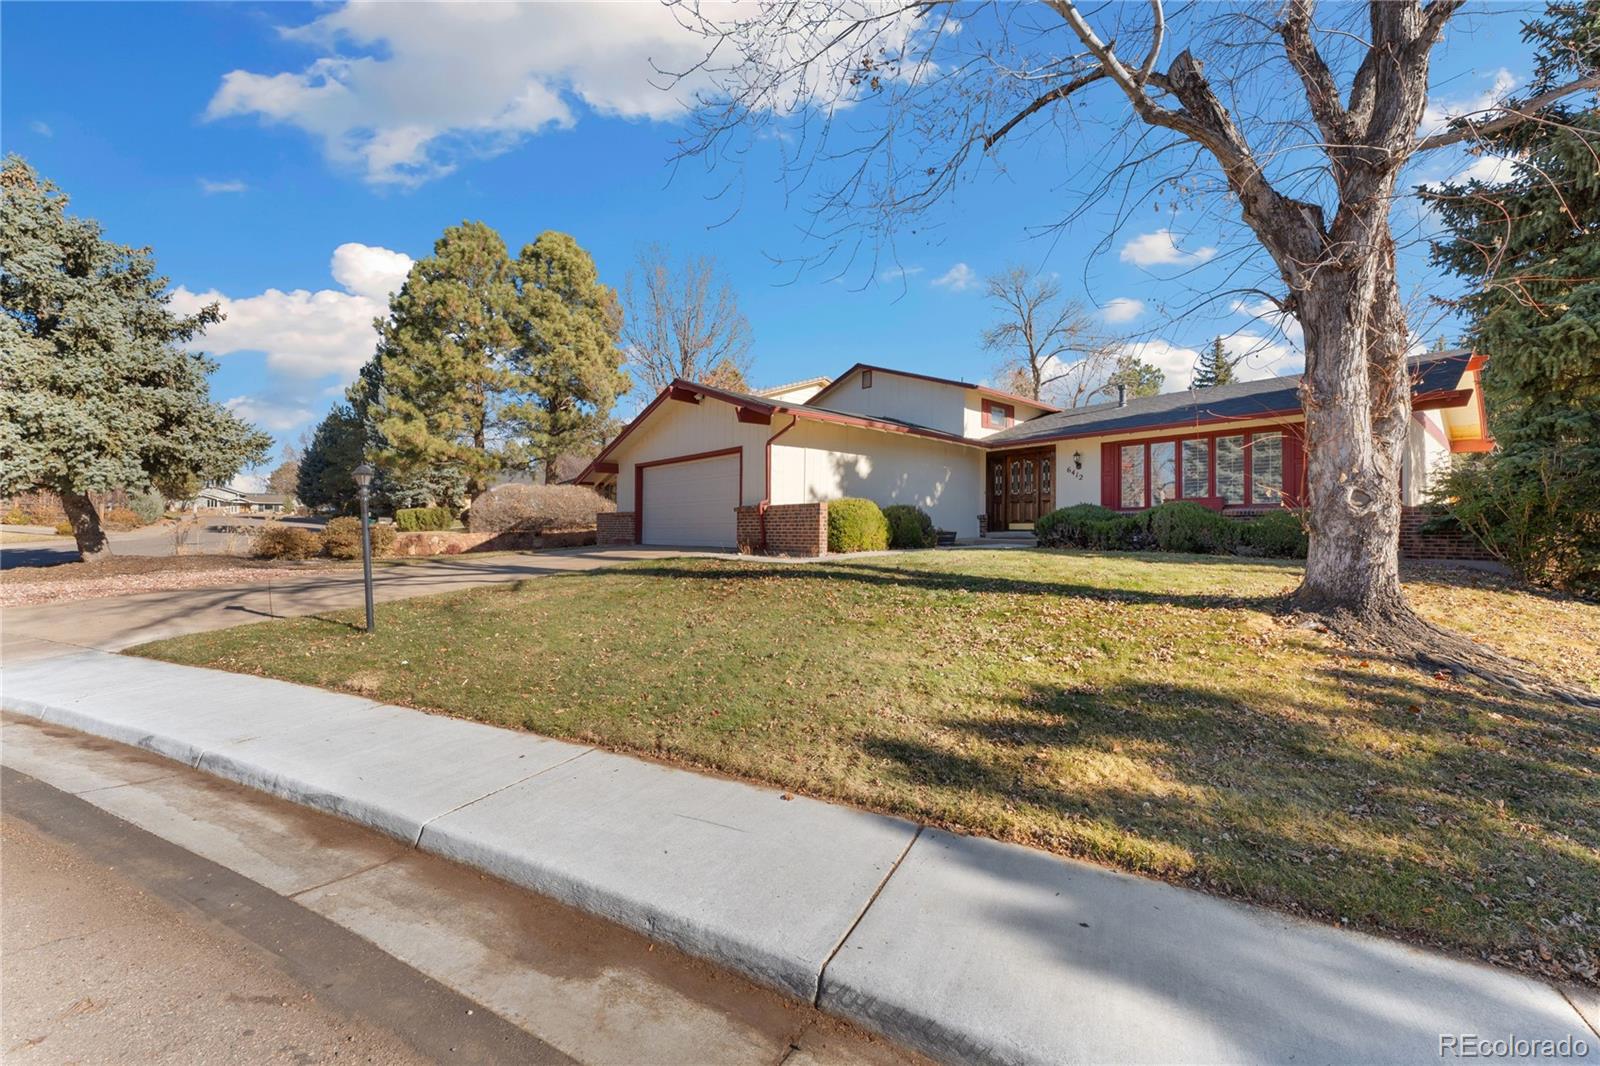 6412 s heritage place, Centennial sold home. Closed on 2024-03-08 for $710,000.